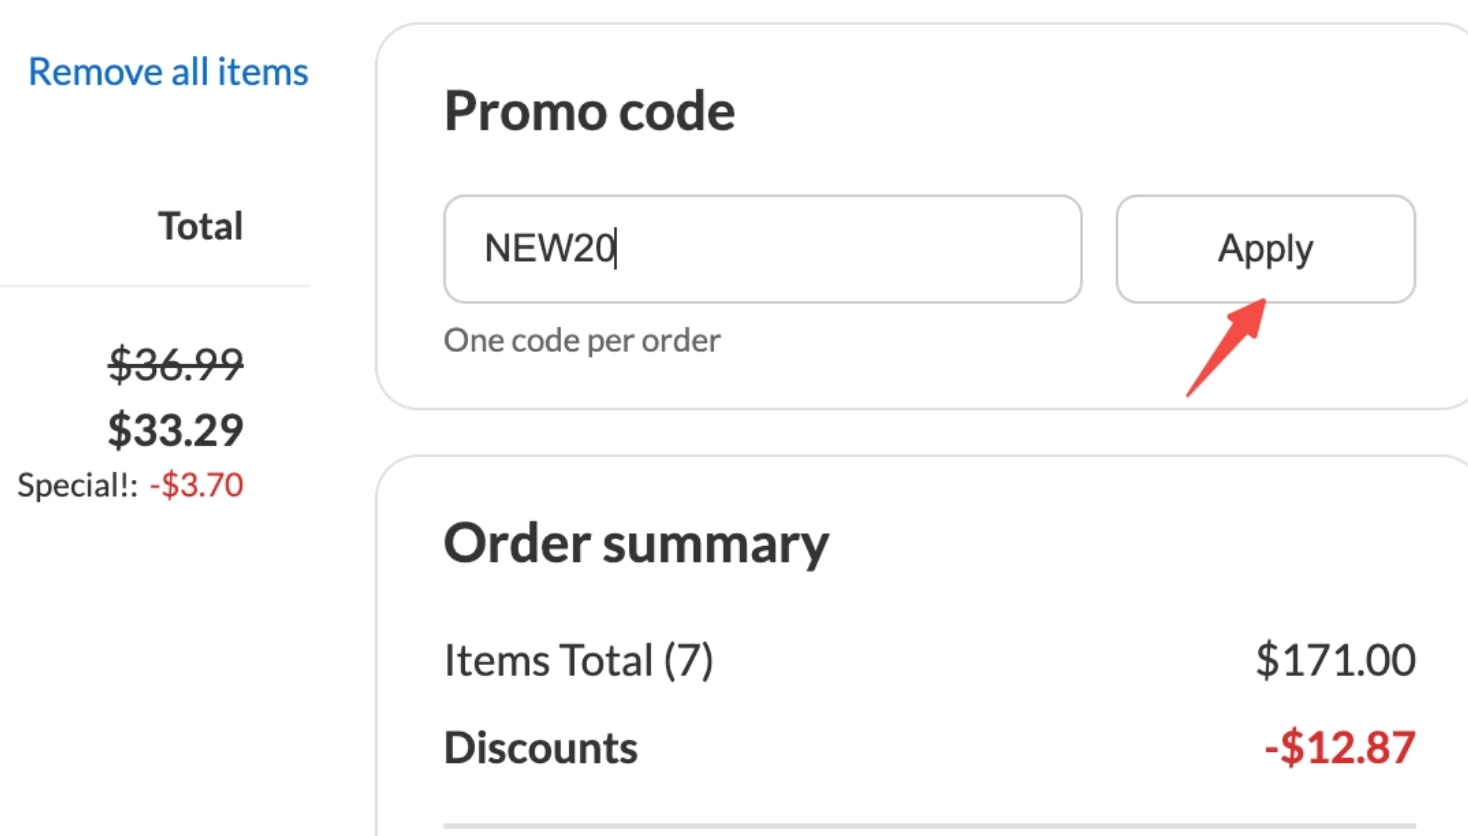 Step 3: When checking out at neweggbusiness.com, paste the discount code into the specified promotional code box.